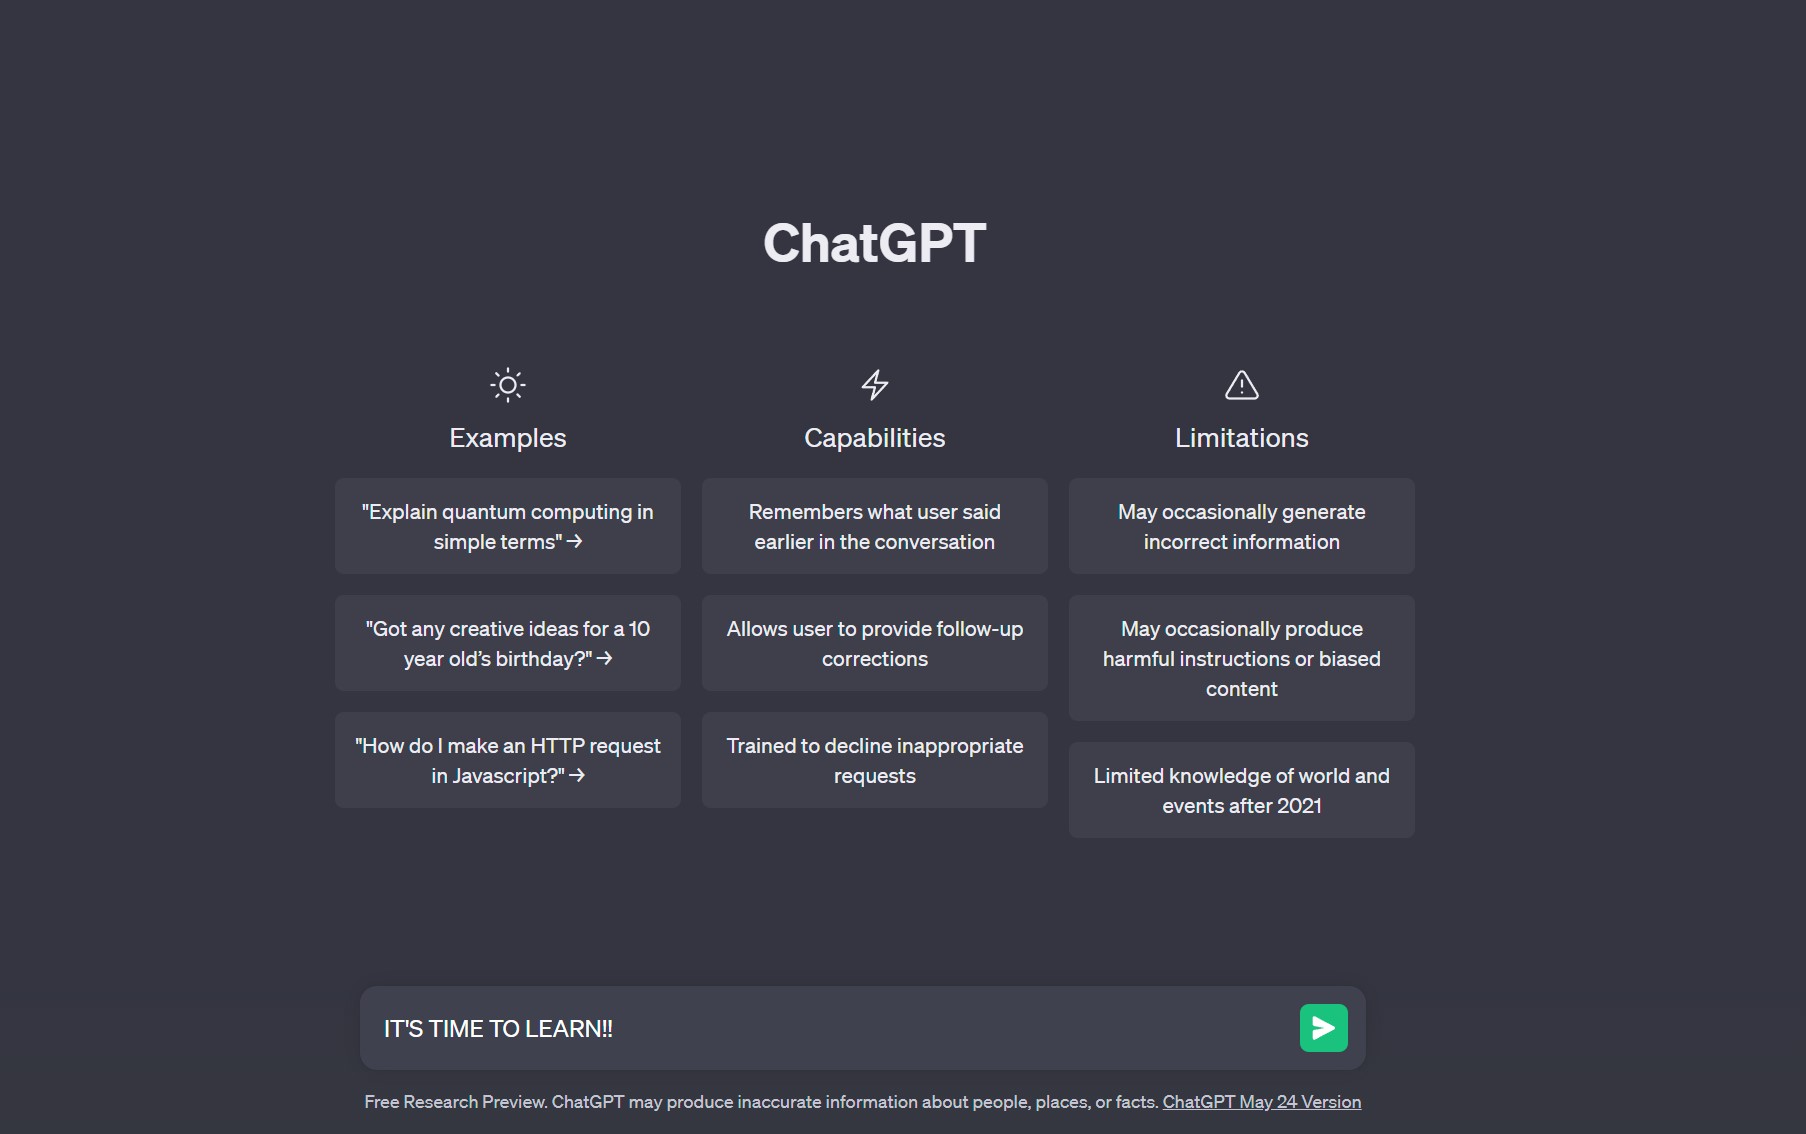 How to use ChatGPT to get a better grade